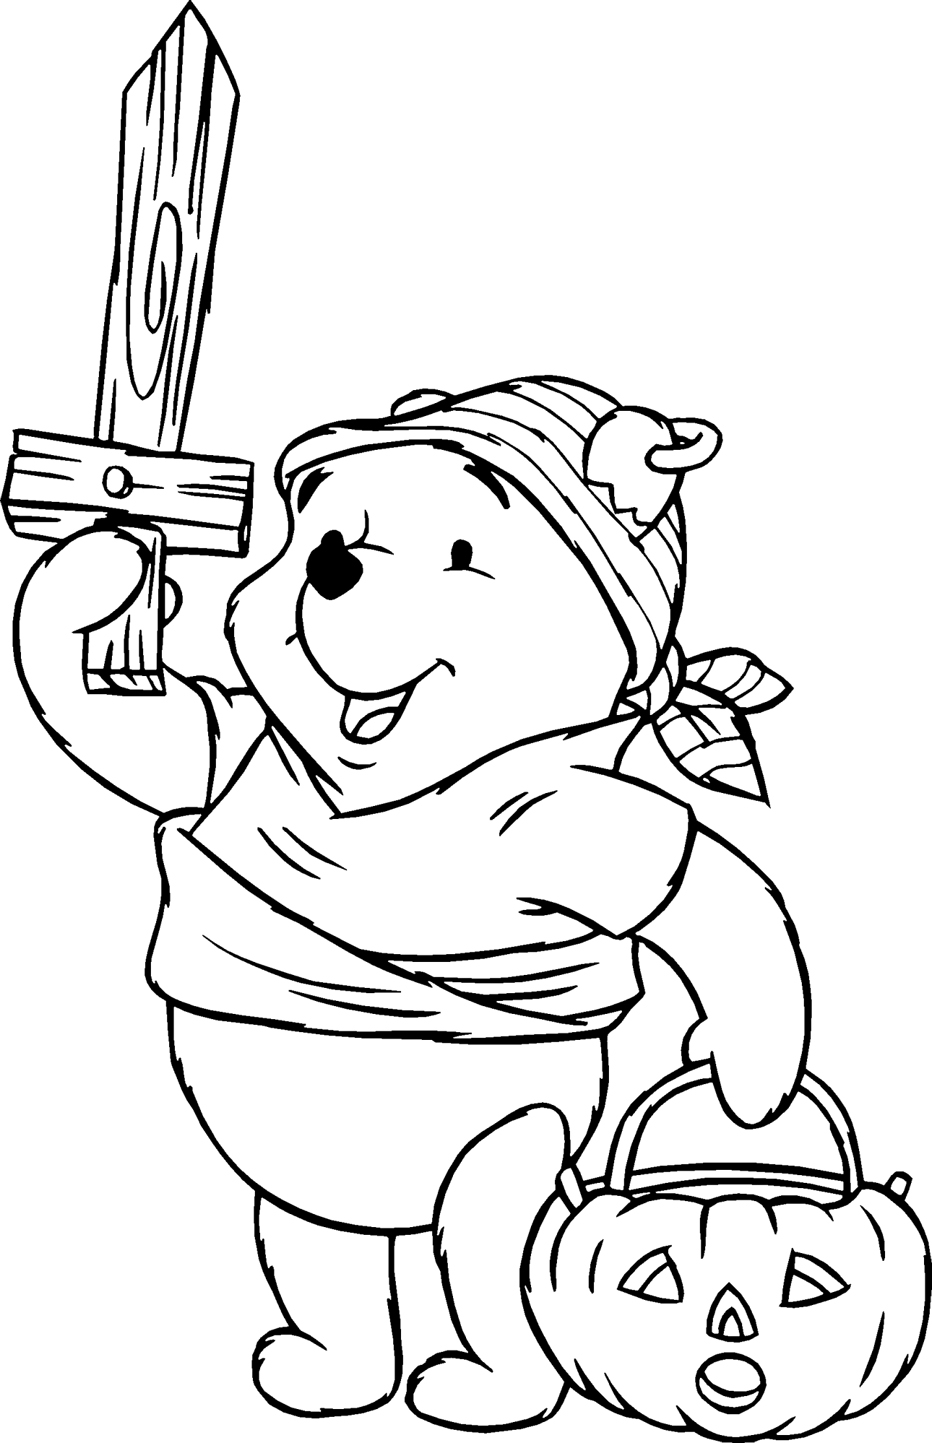 Coloring Book Pages 9